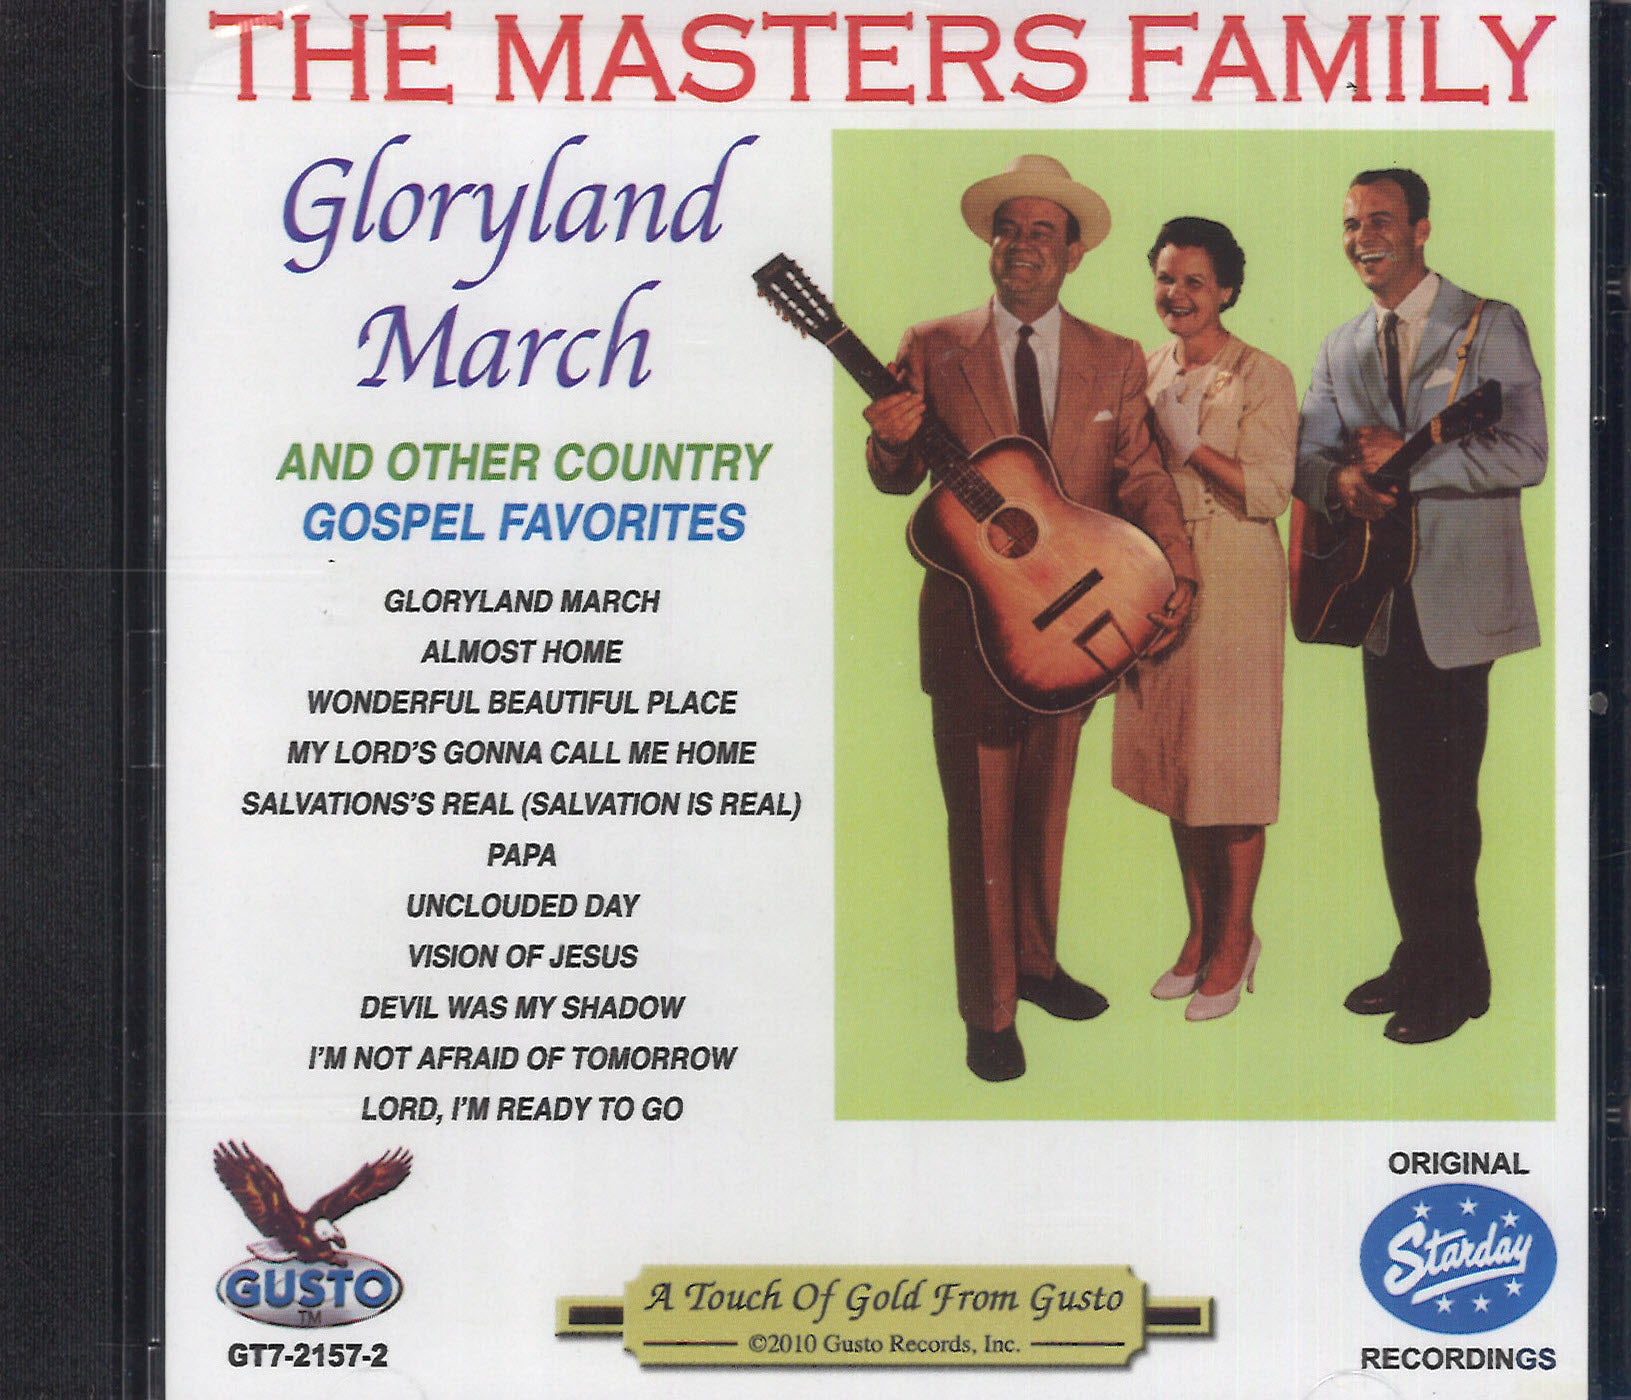 The Masters Family Gloryland March